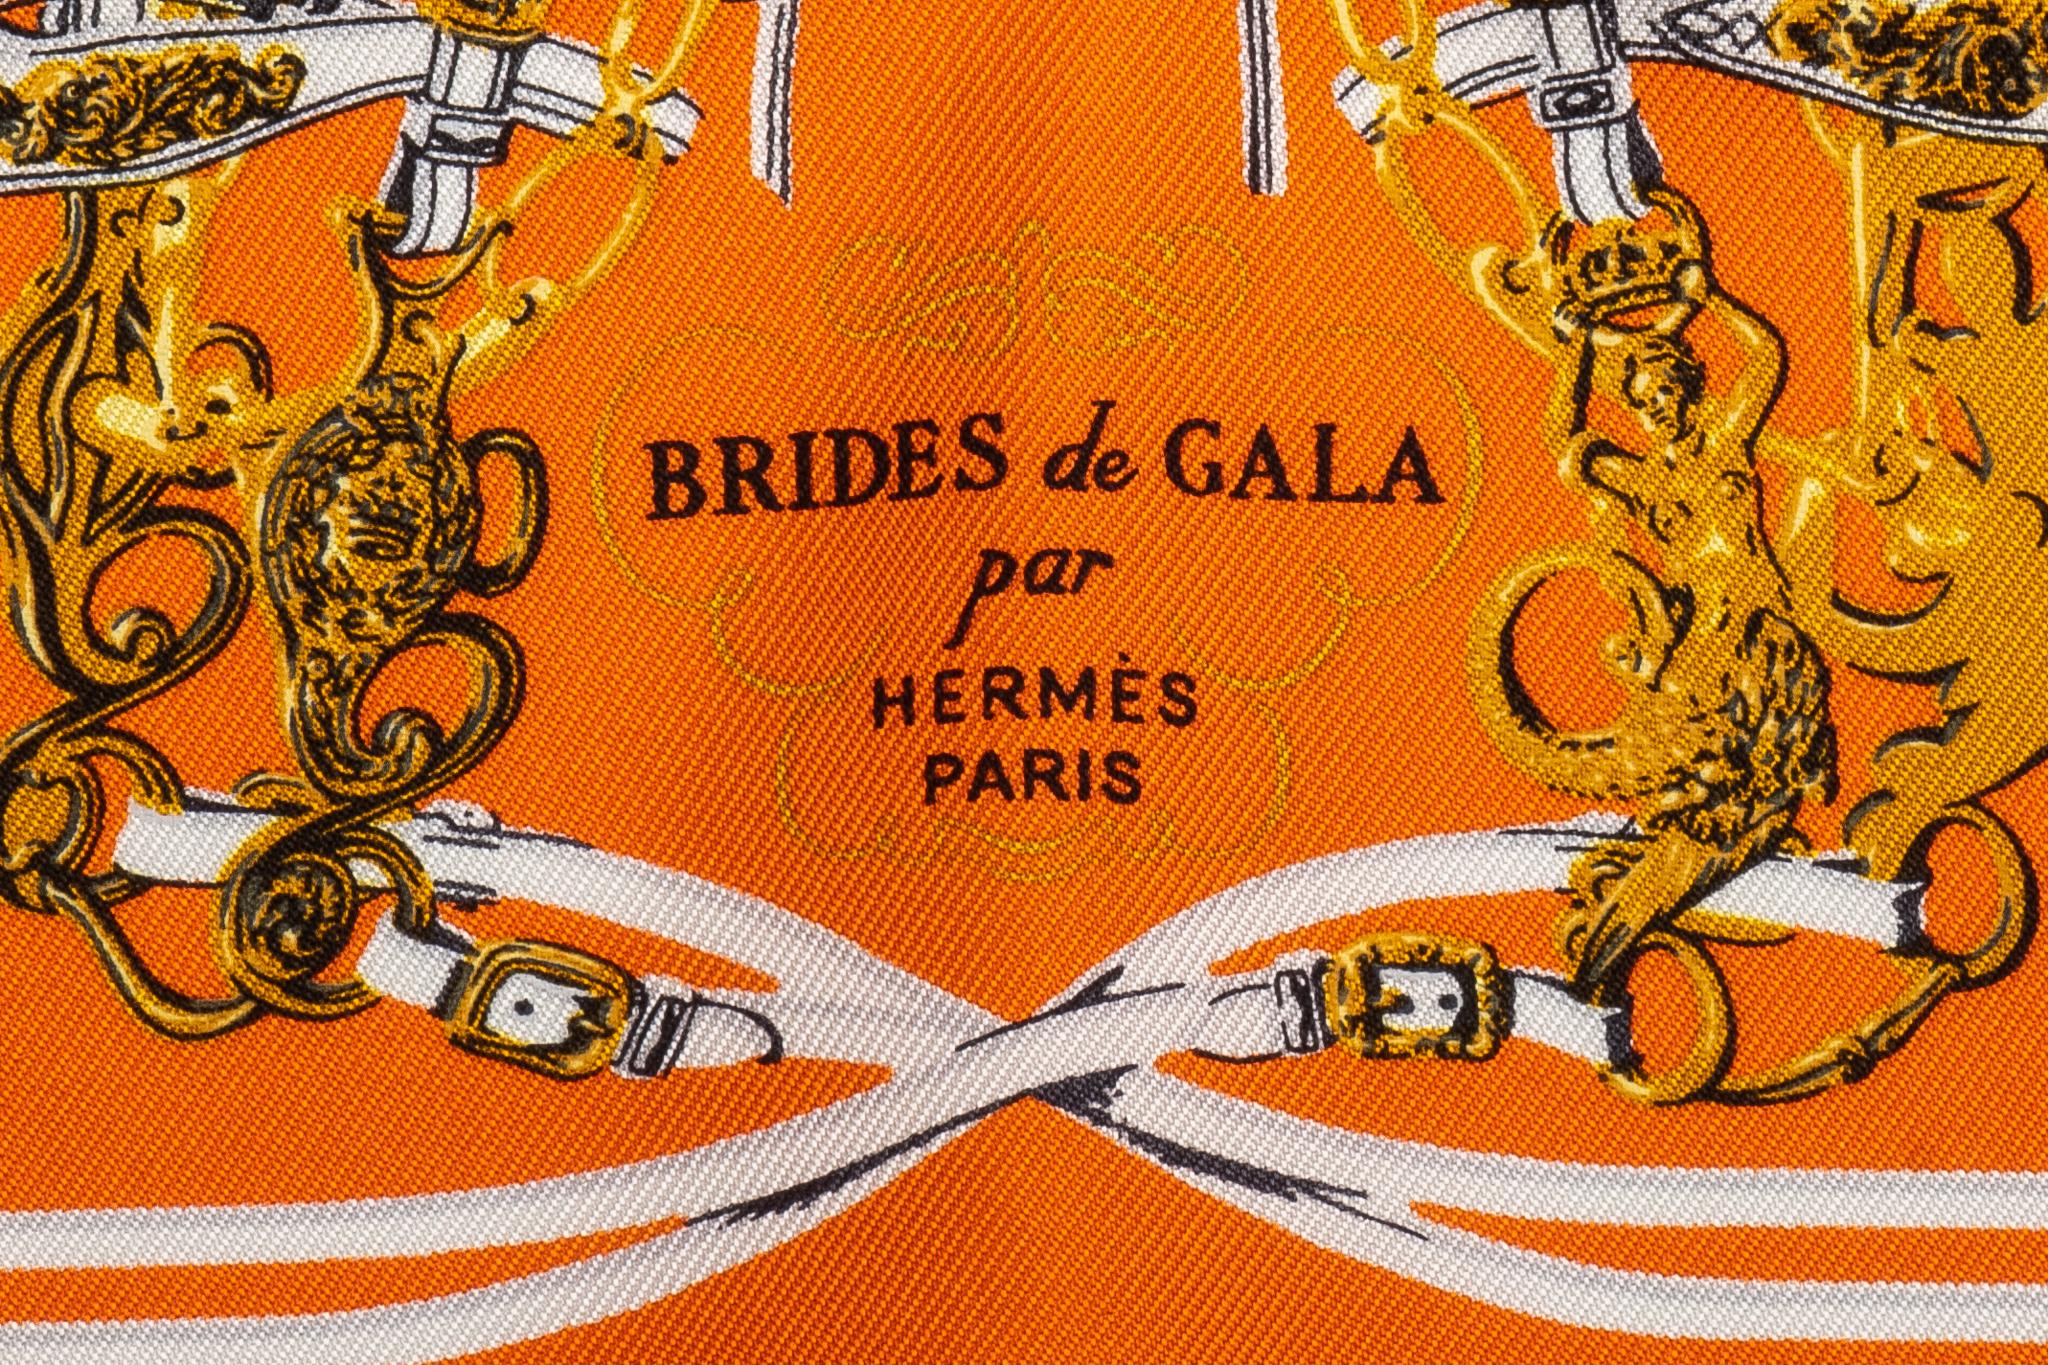 Hermès Brides de Gala pochette scarf by artist Hugo Grygkar. First issue date was 1957. Showcasing horse bits and pale blue trim. Hand-rolled edges. Comes in box.